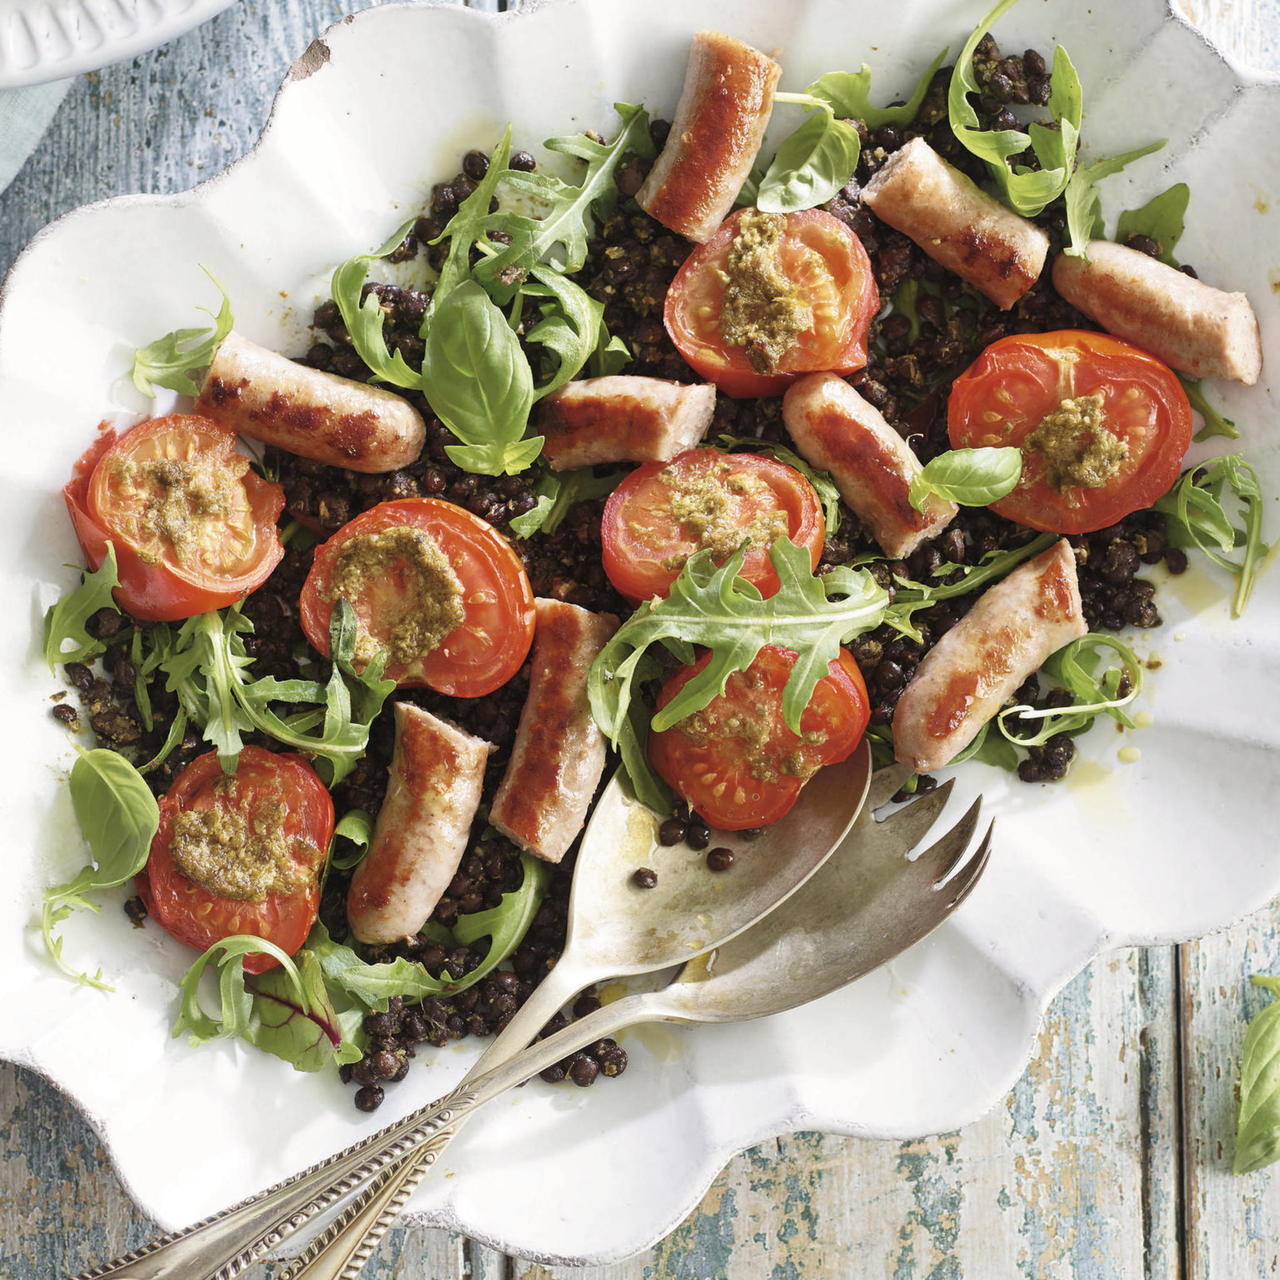 Roast tomato and chipolata salad with puy lentils and pesto | Cook With M&S